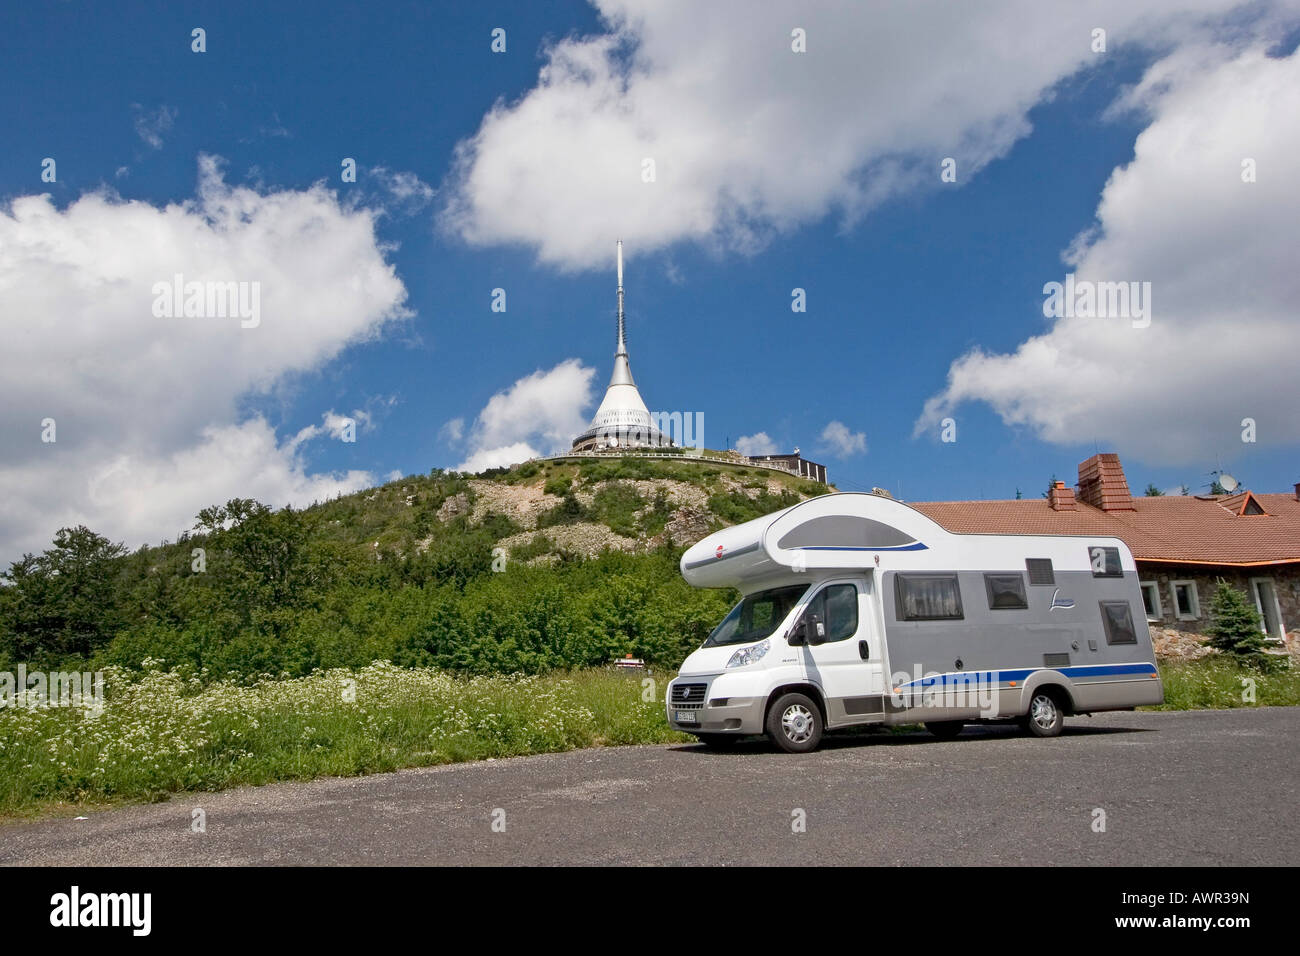 Campmobile, television tower, mountain ressort built by Hubacek, Jested, Liberec, Czech Republic, Europe Stock Photo